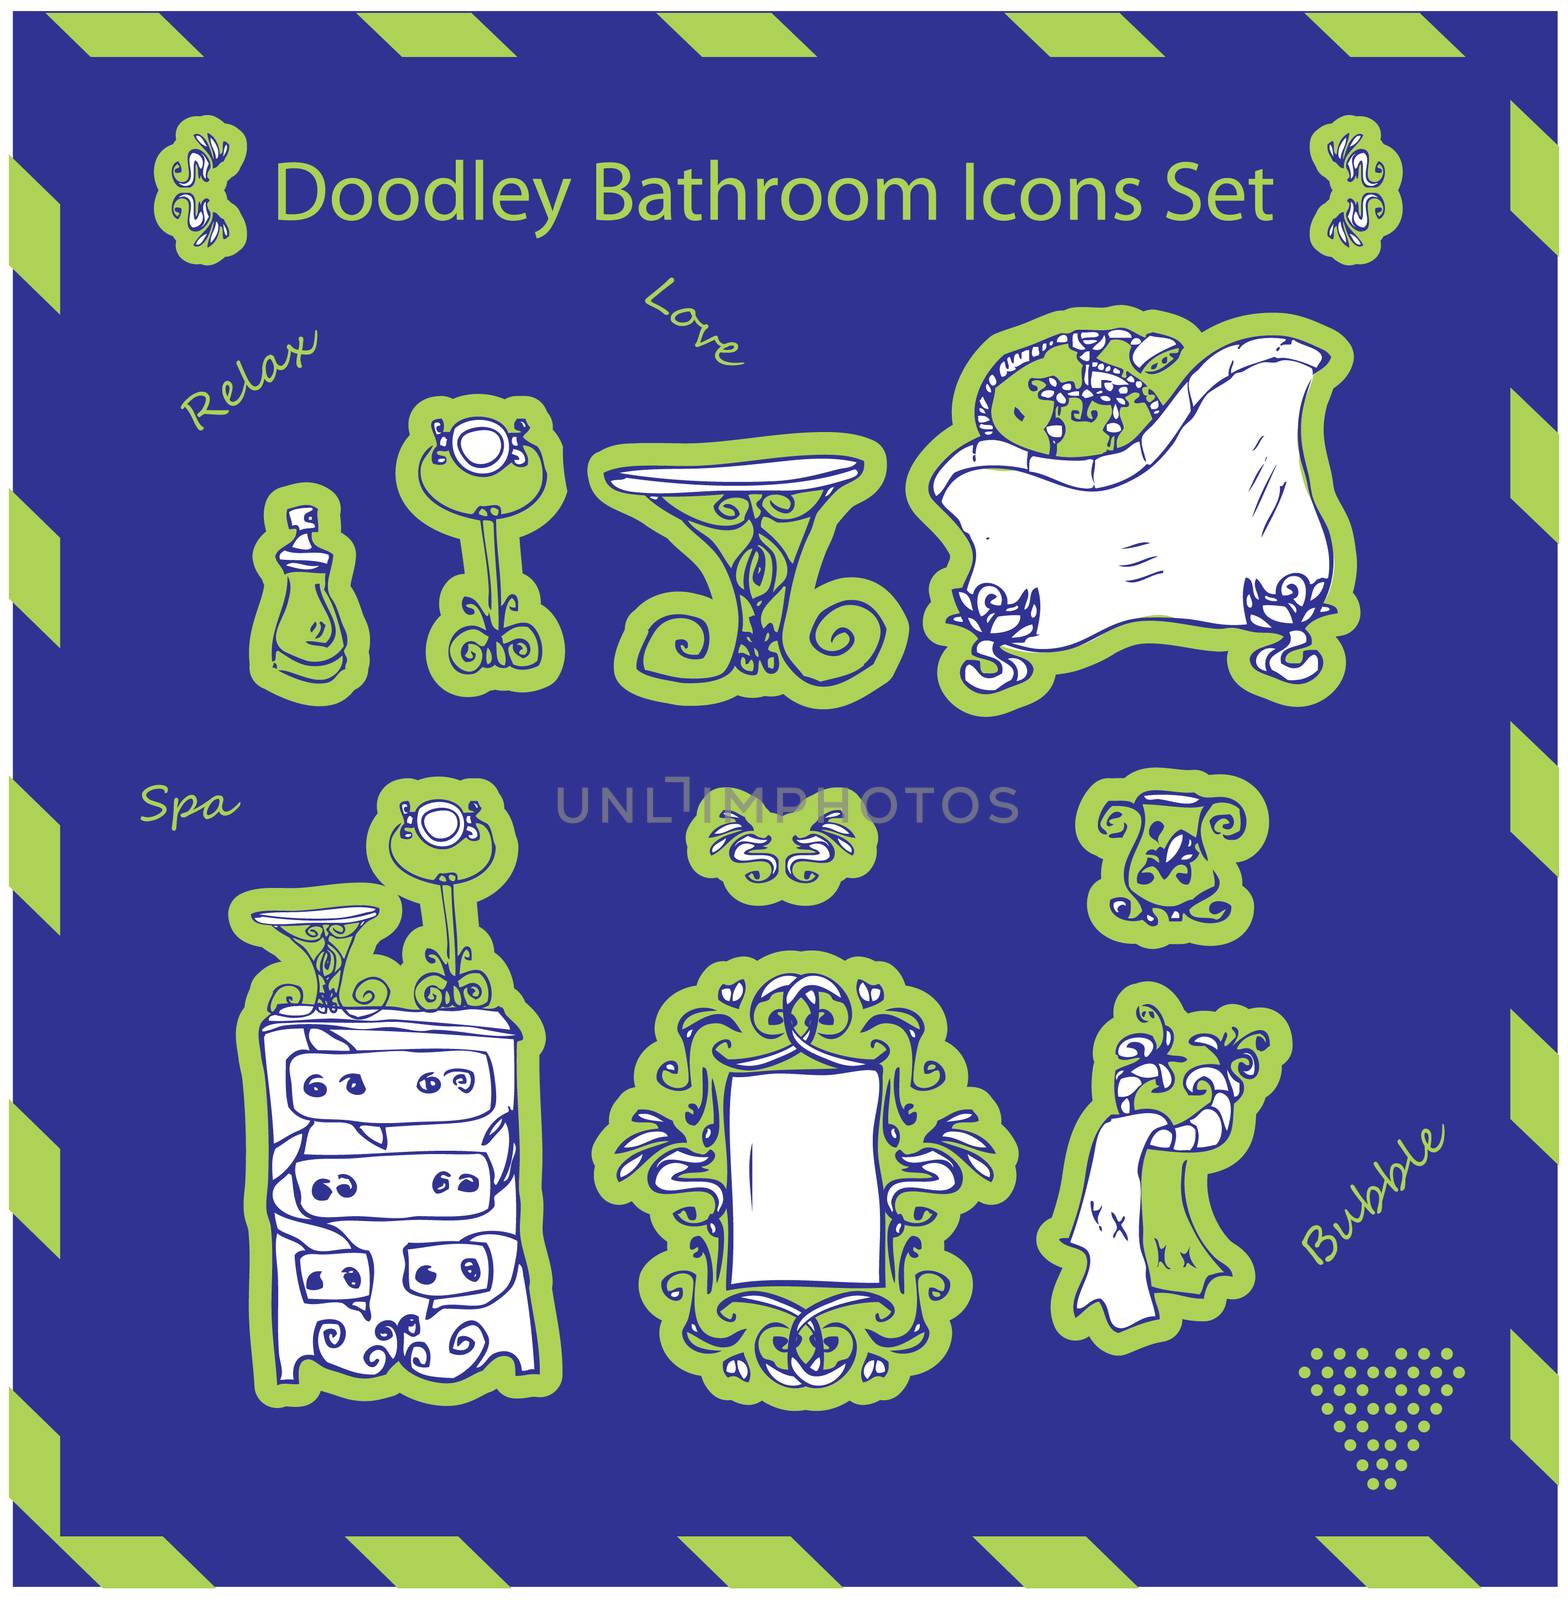  bathroom icons set doodley stickers template by tamaravector